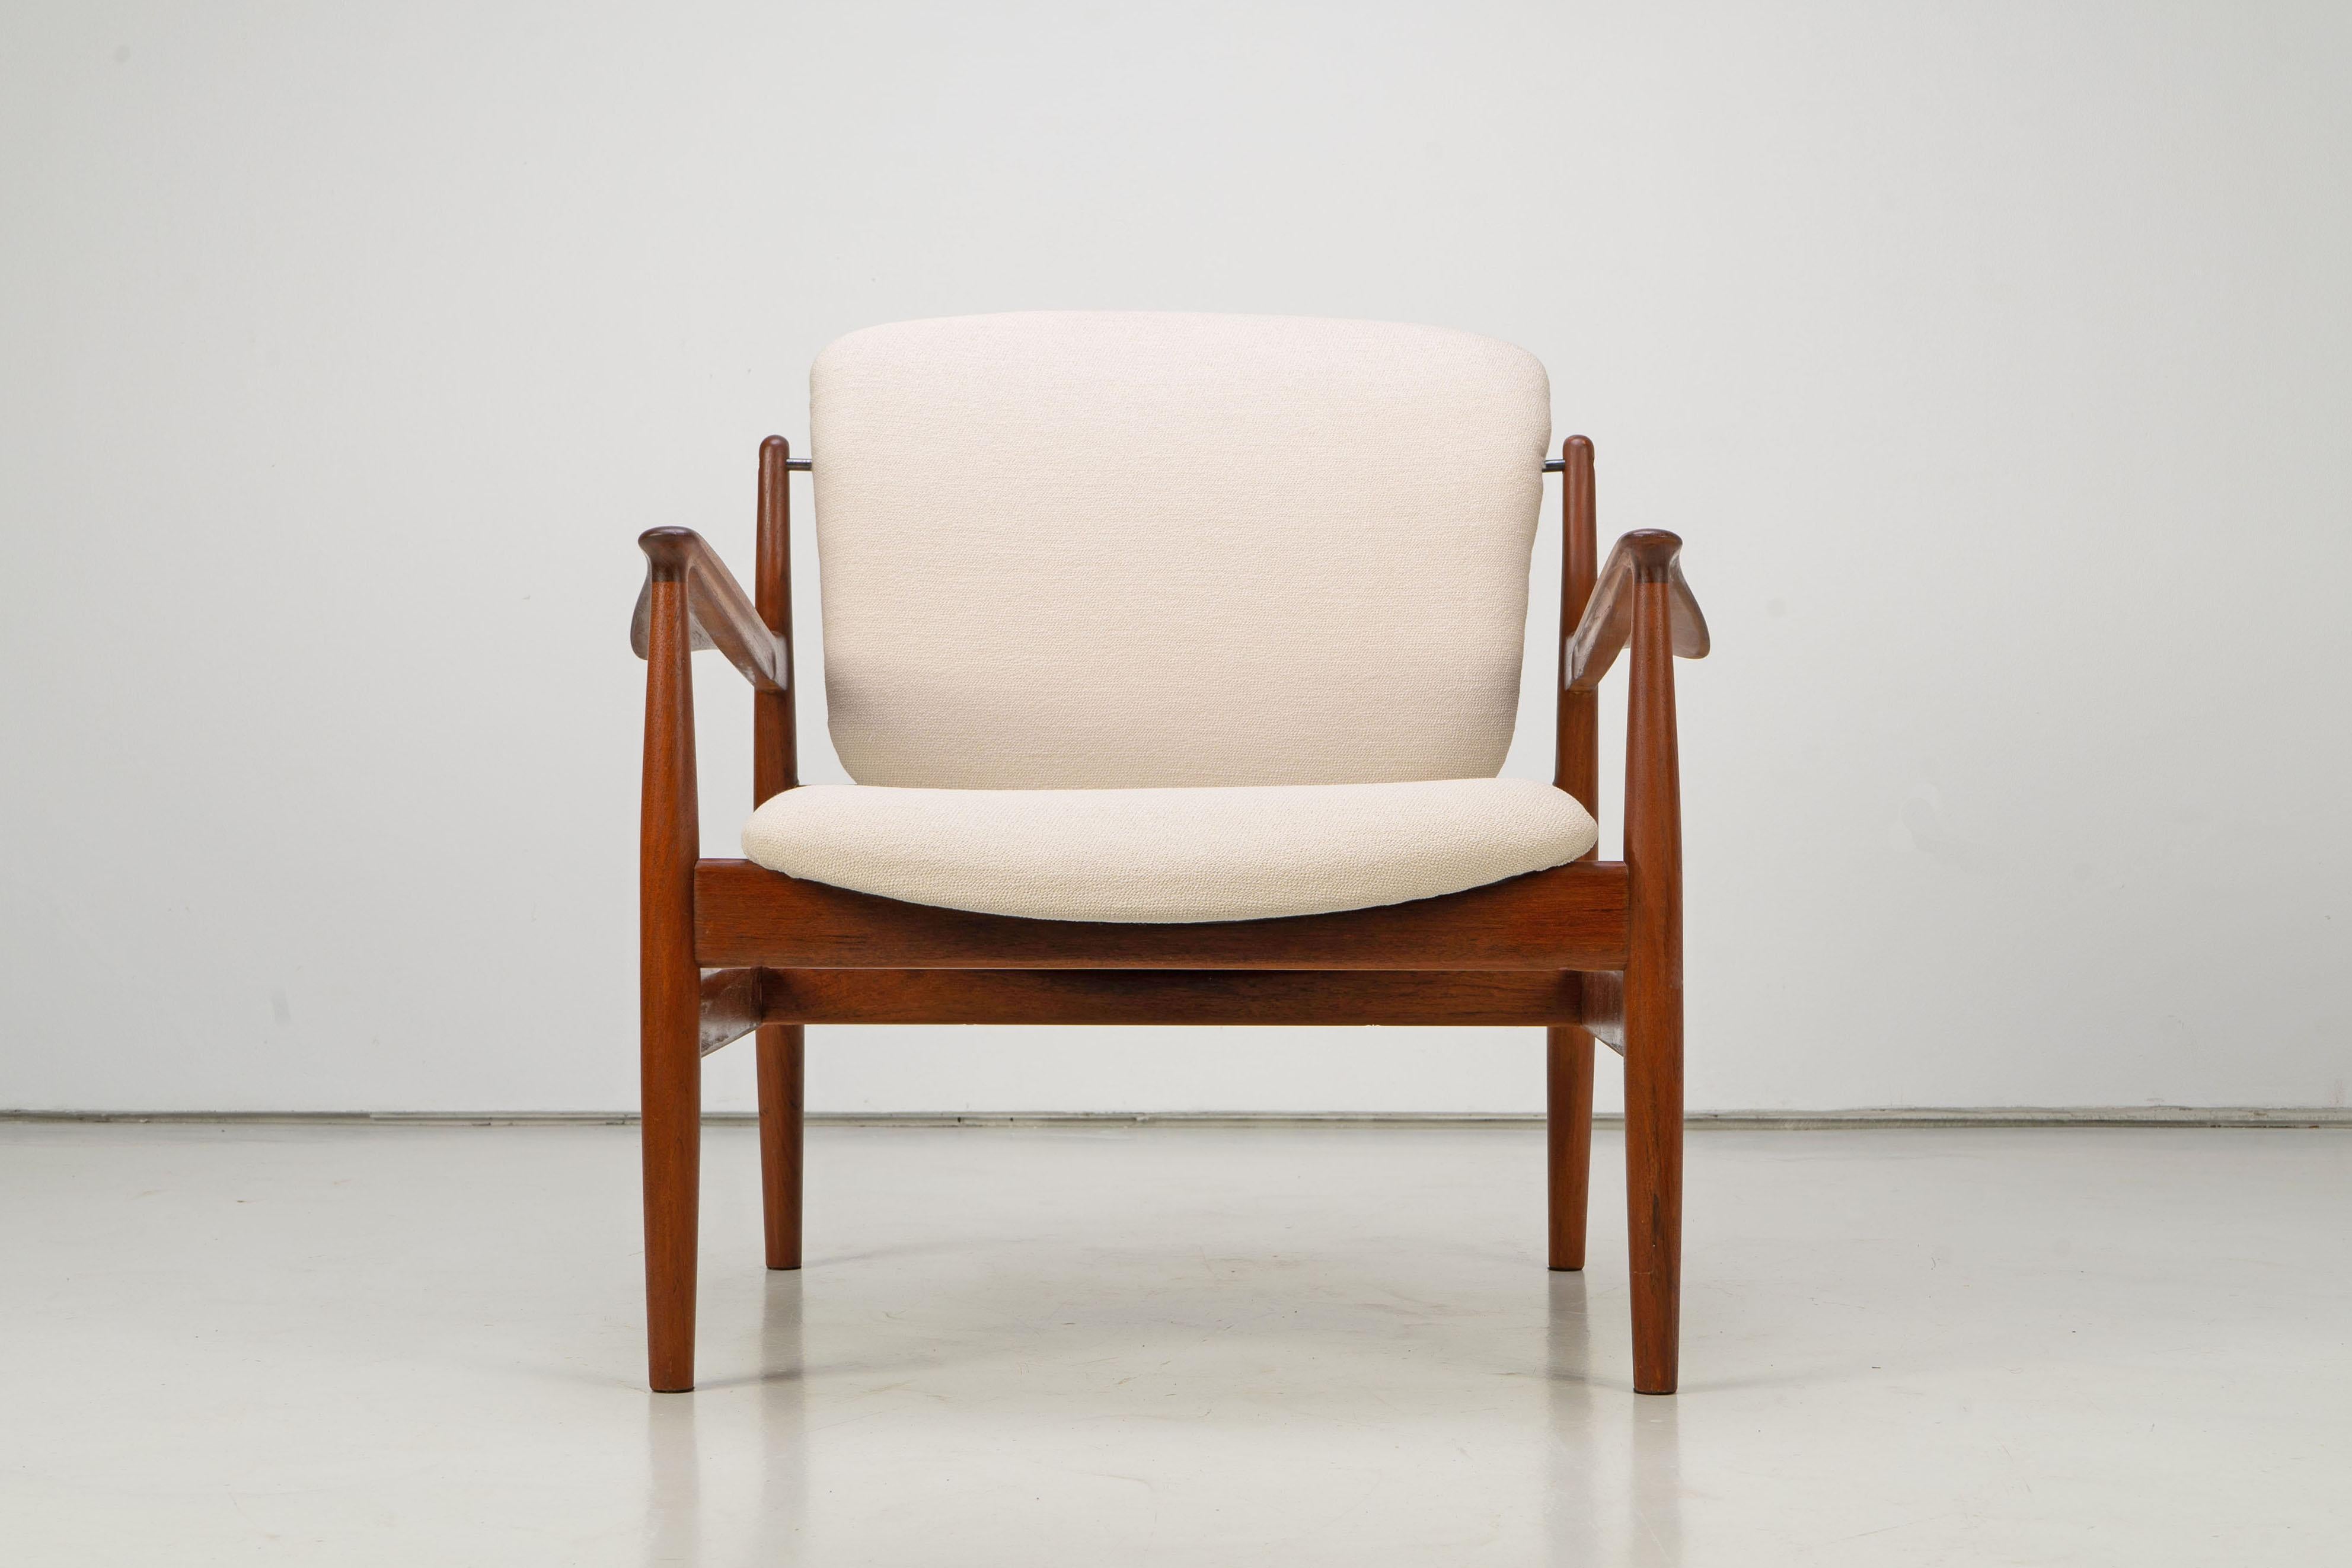 Danish Modern 1950 by Finn Juhl Lounge Chair Teak Wool Fabric Cream White In Excellent Condition For Sale In Munster, DE